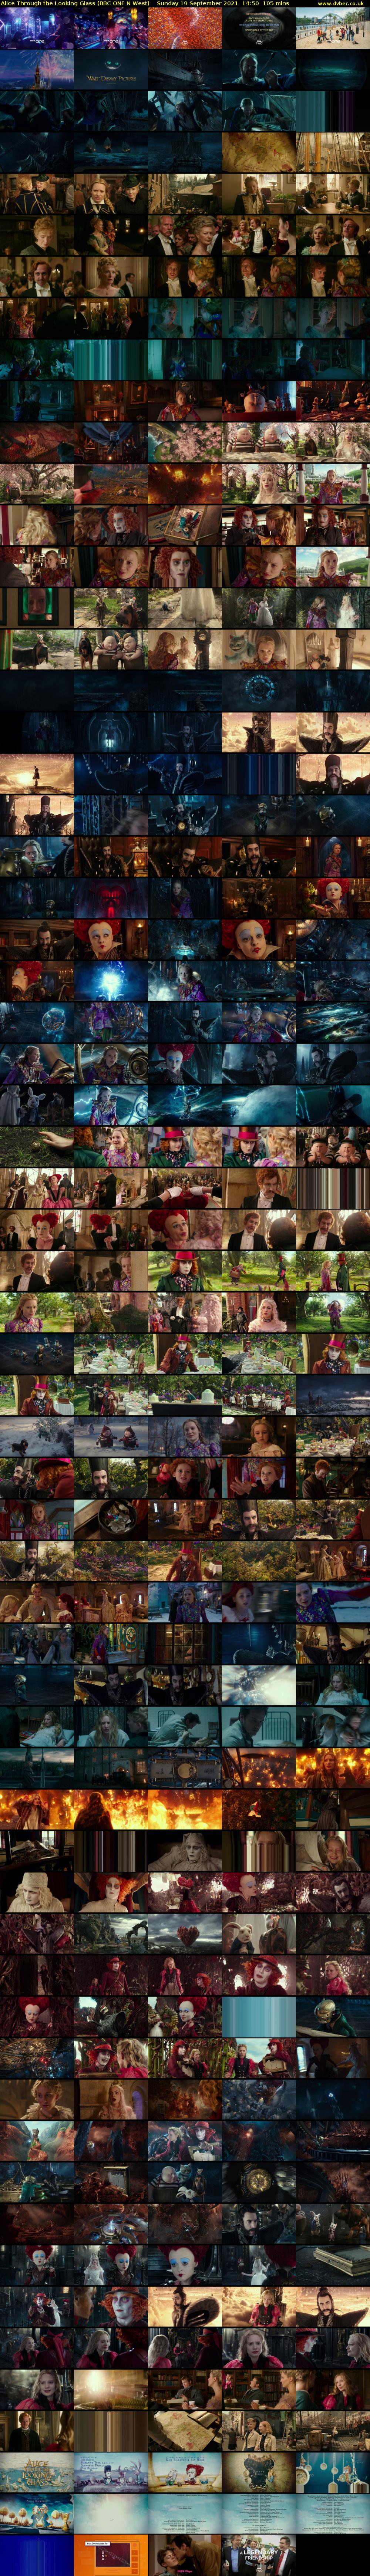 Alice Through the Looking Glass (BBC ONE N West) Sunday 19 September 2021 14:50 - 16:35